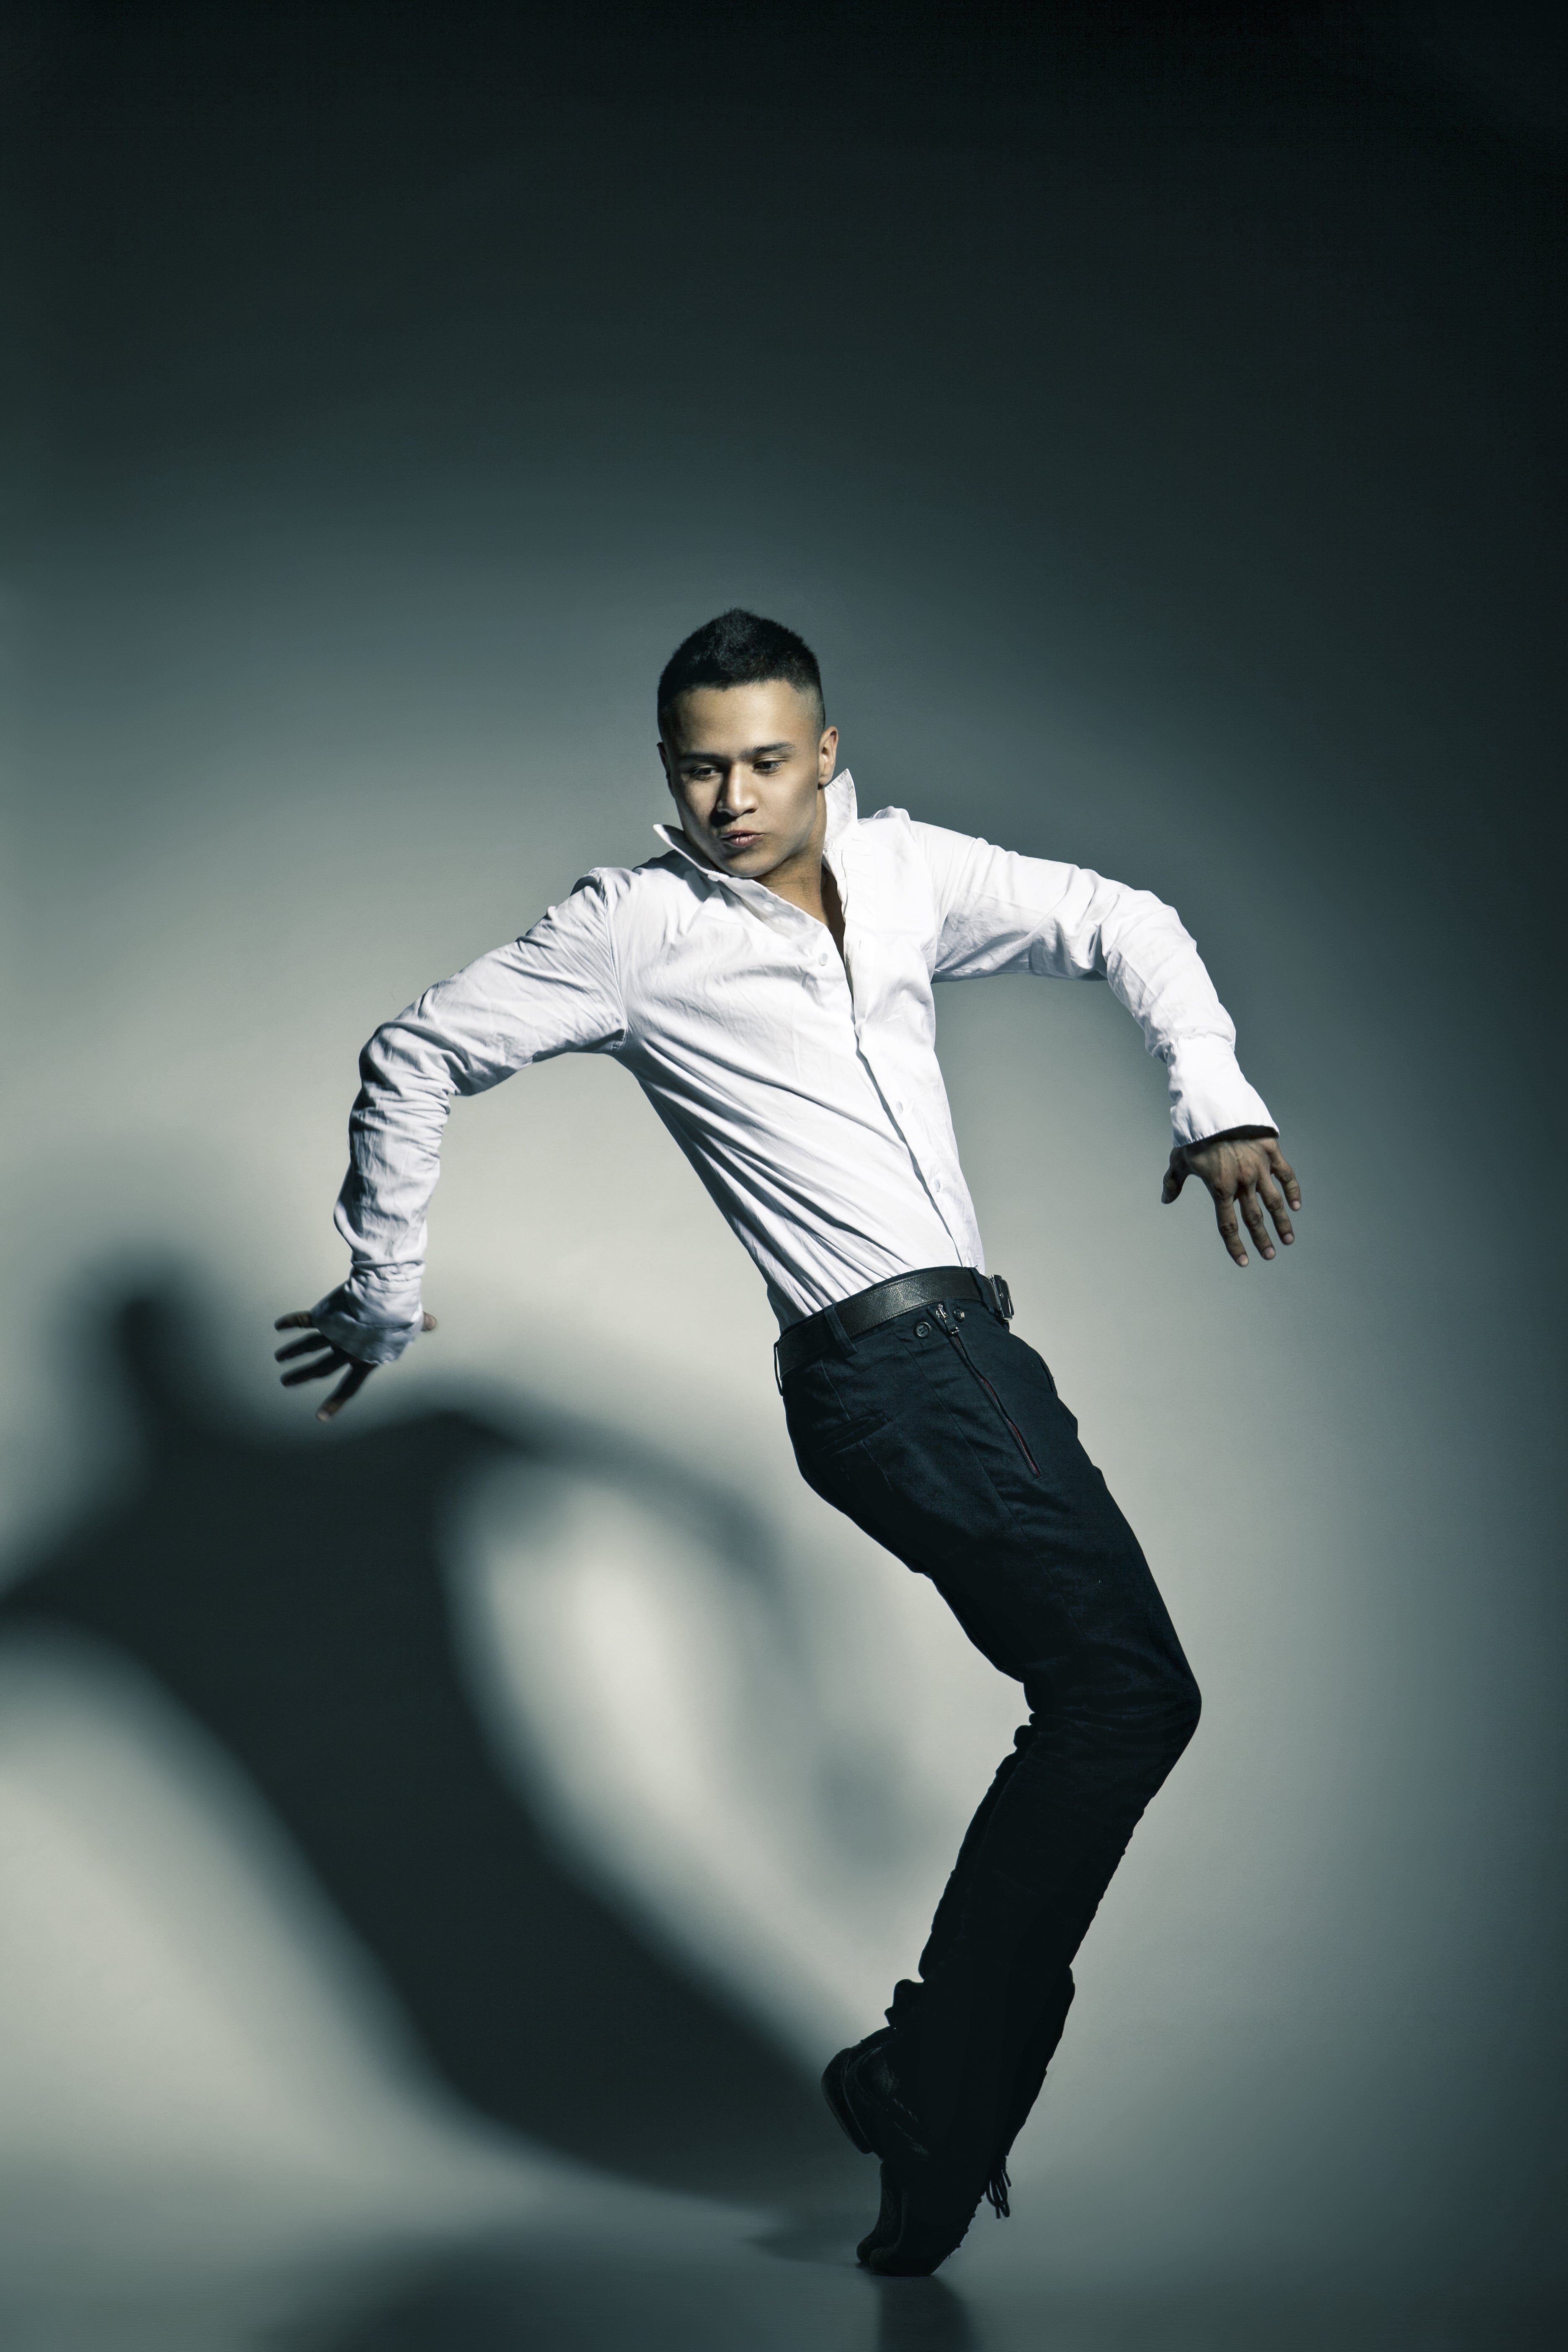 modern jazz dancer in front of a grey backdrop